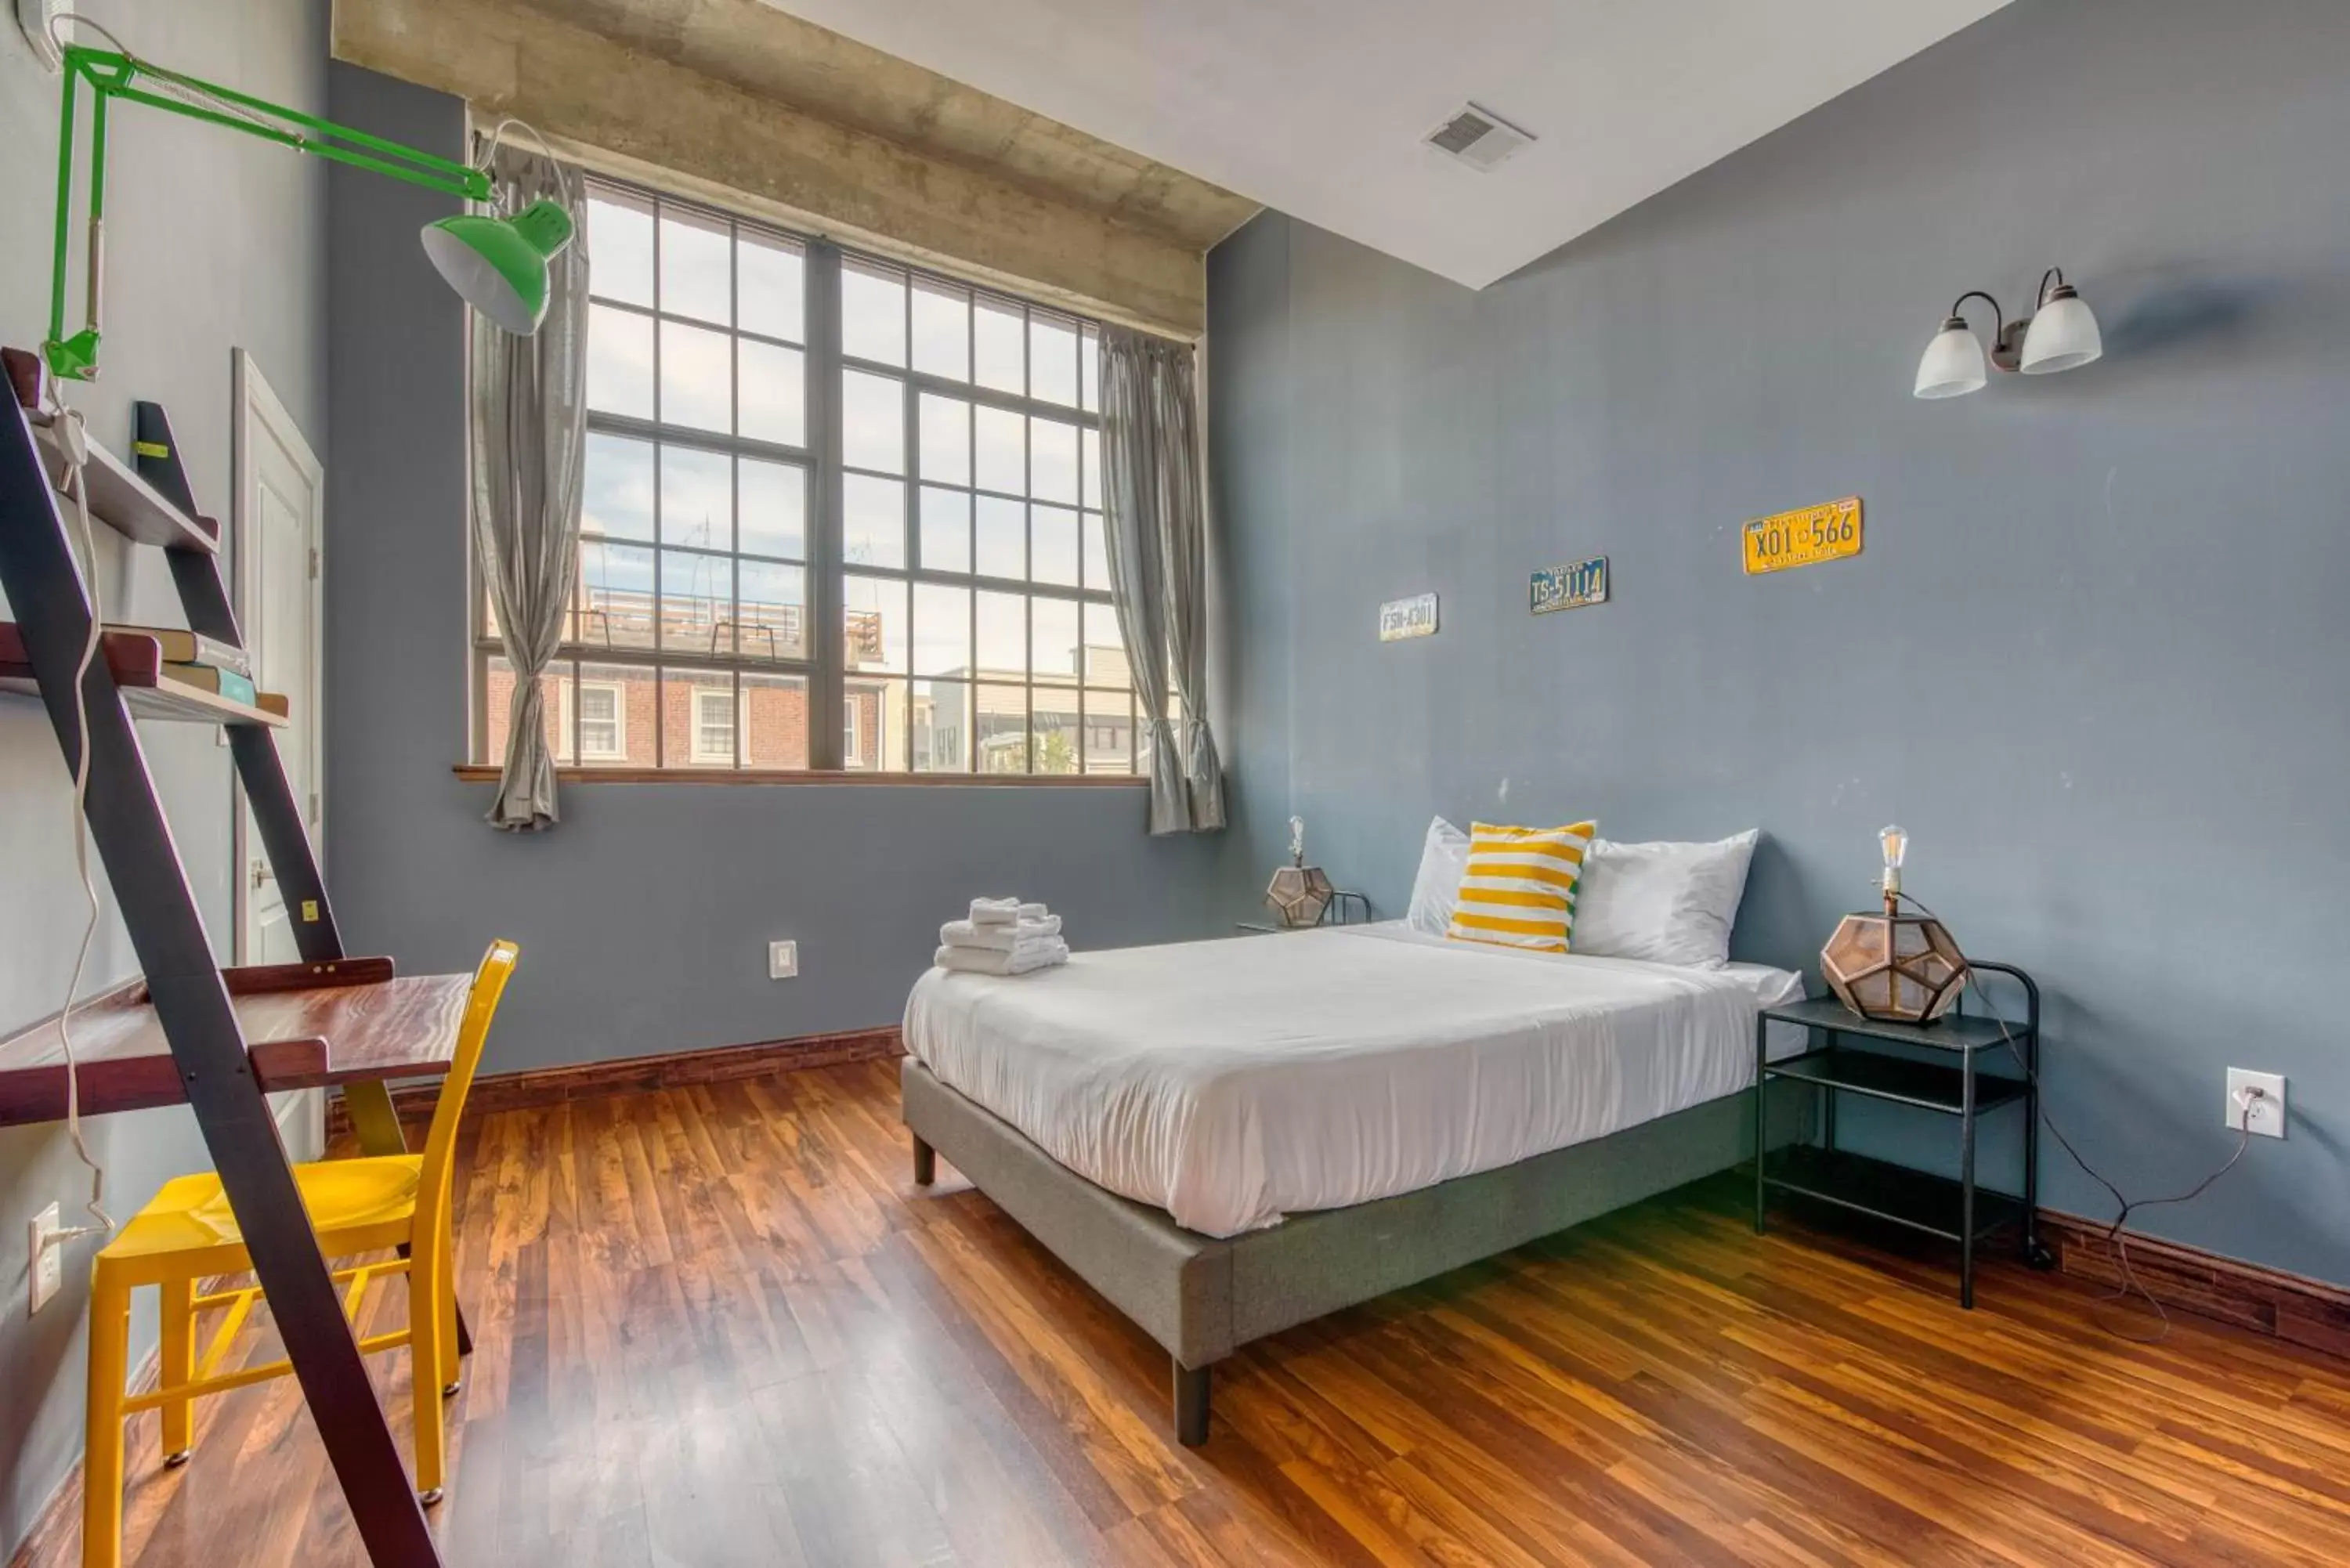 Apartment in Sosuite at Independence Lofts - Callowhill